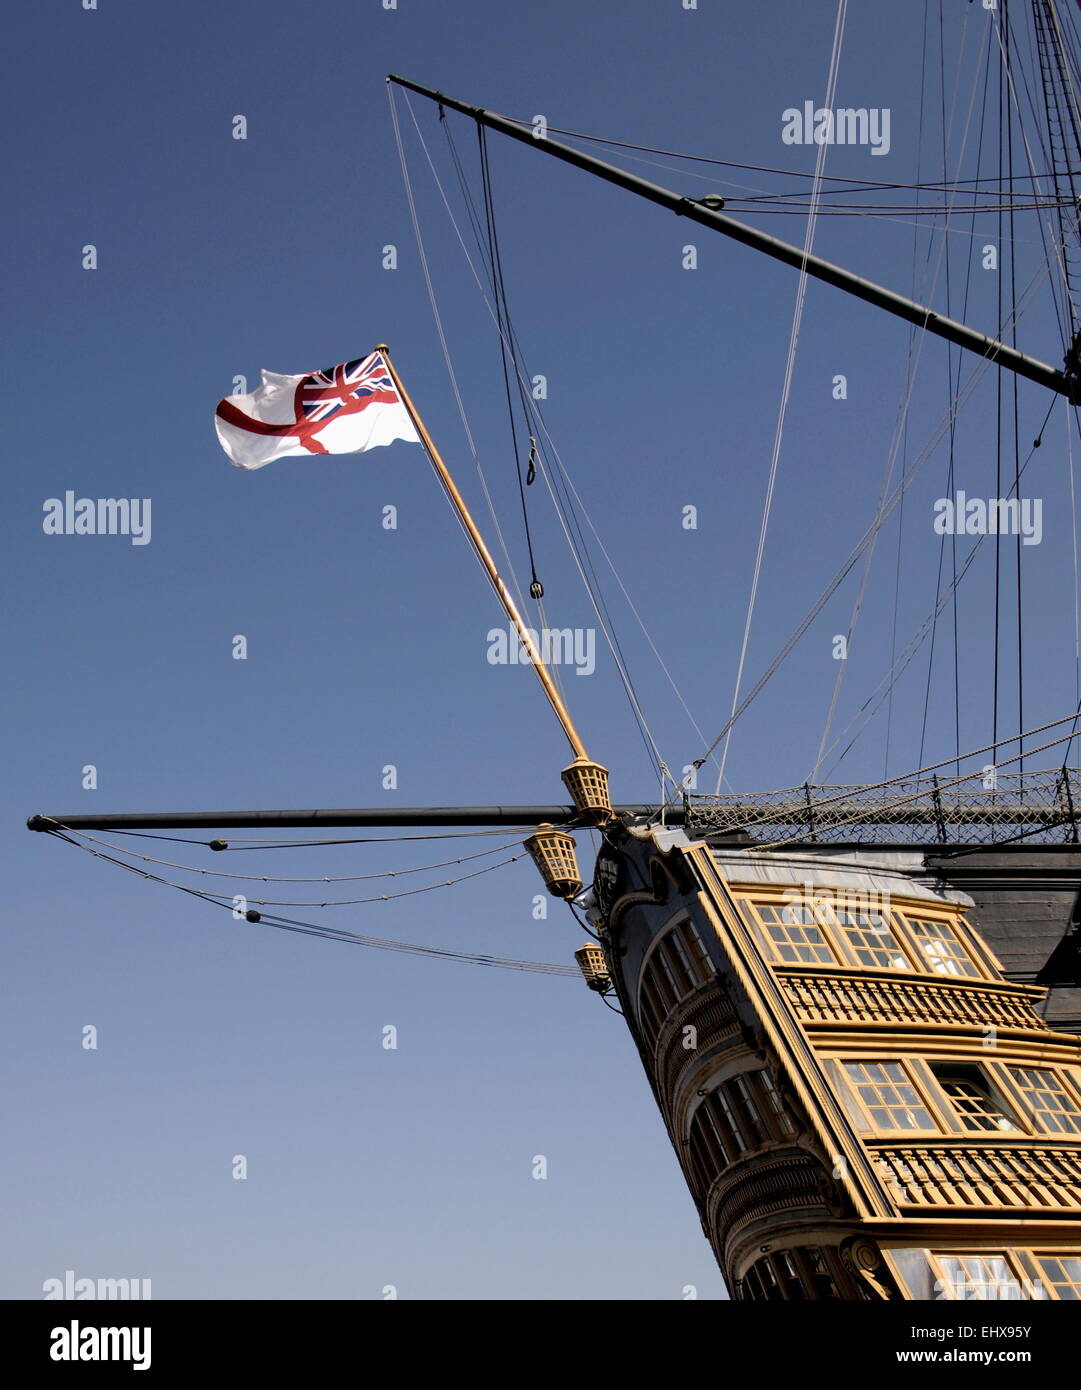 AJAXNETPHOTO. 21ST APRIL, 2011. PORTSMOUTH, ENGLAND. - IN COMMISSION - THE WHITE ENSIGN FLIES FROM THE STERN OF NELSON'S FLAGSHIP H.M.S.VICTORY. PHOTO:JONATHAN EASTLAND/AJAX REF:D112104_1237 Stock Photo